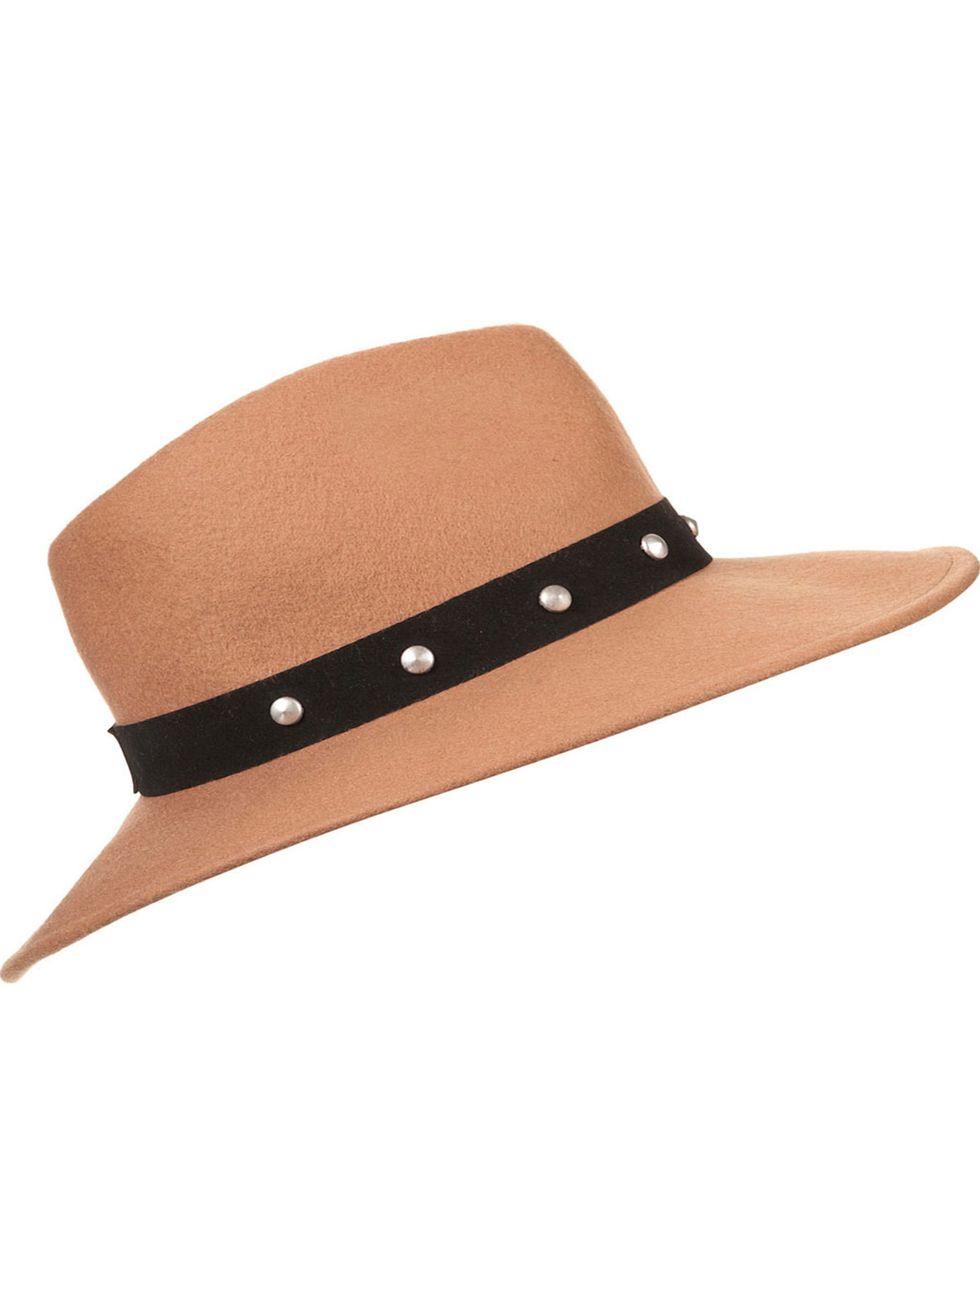 <p>Topshop Camel Studded Fedora, £28</p><p><a href="http://shopping.elleuk.com/browse?fts=topshop+fedora">BUY NOW</a></p>